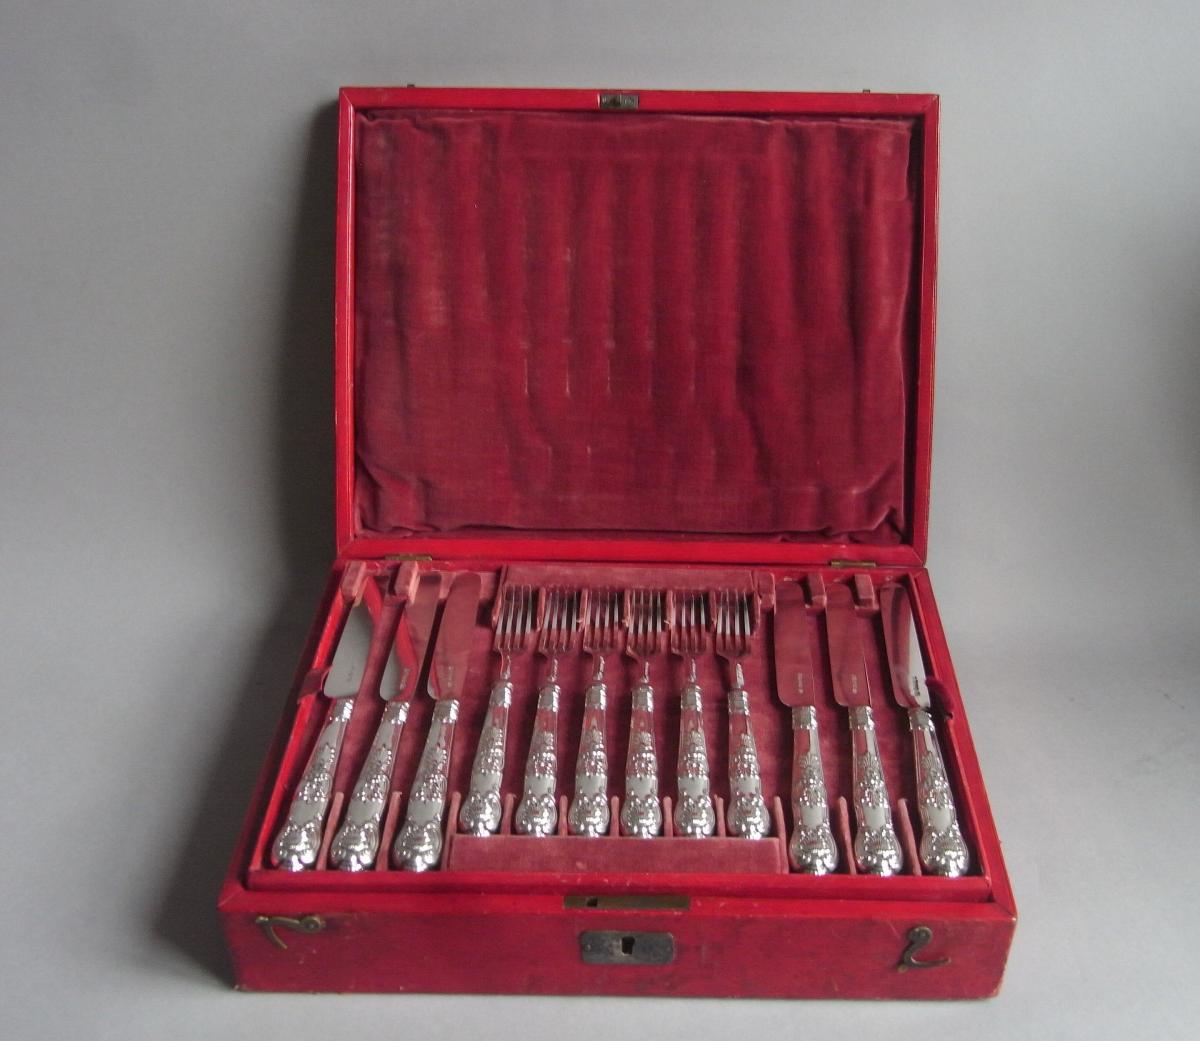 An extremely fine Cased George IV Fruit Set made in Sheffield in 1825/26 by Aaron Hadfield